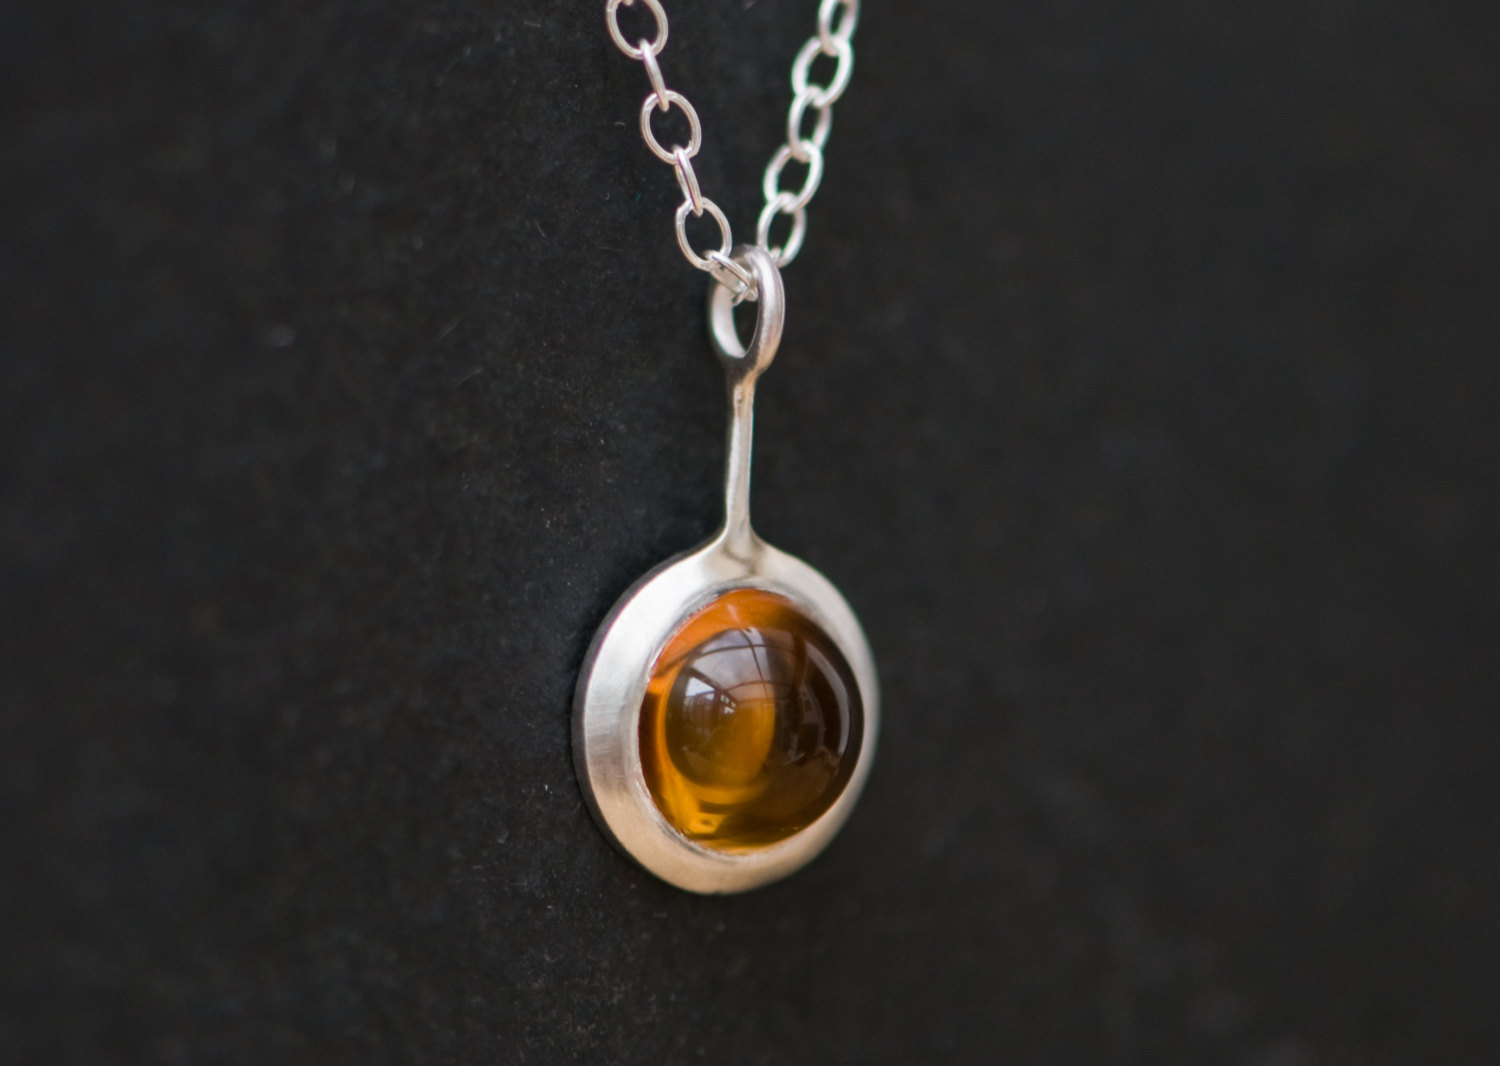 Simple cabochon citrine Lollipop necklace in sterling silver by William White